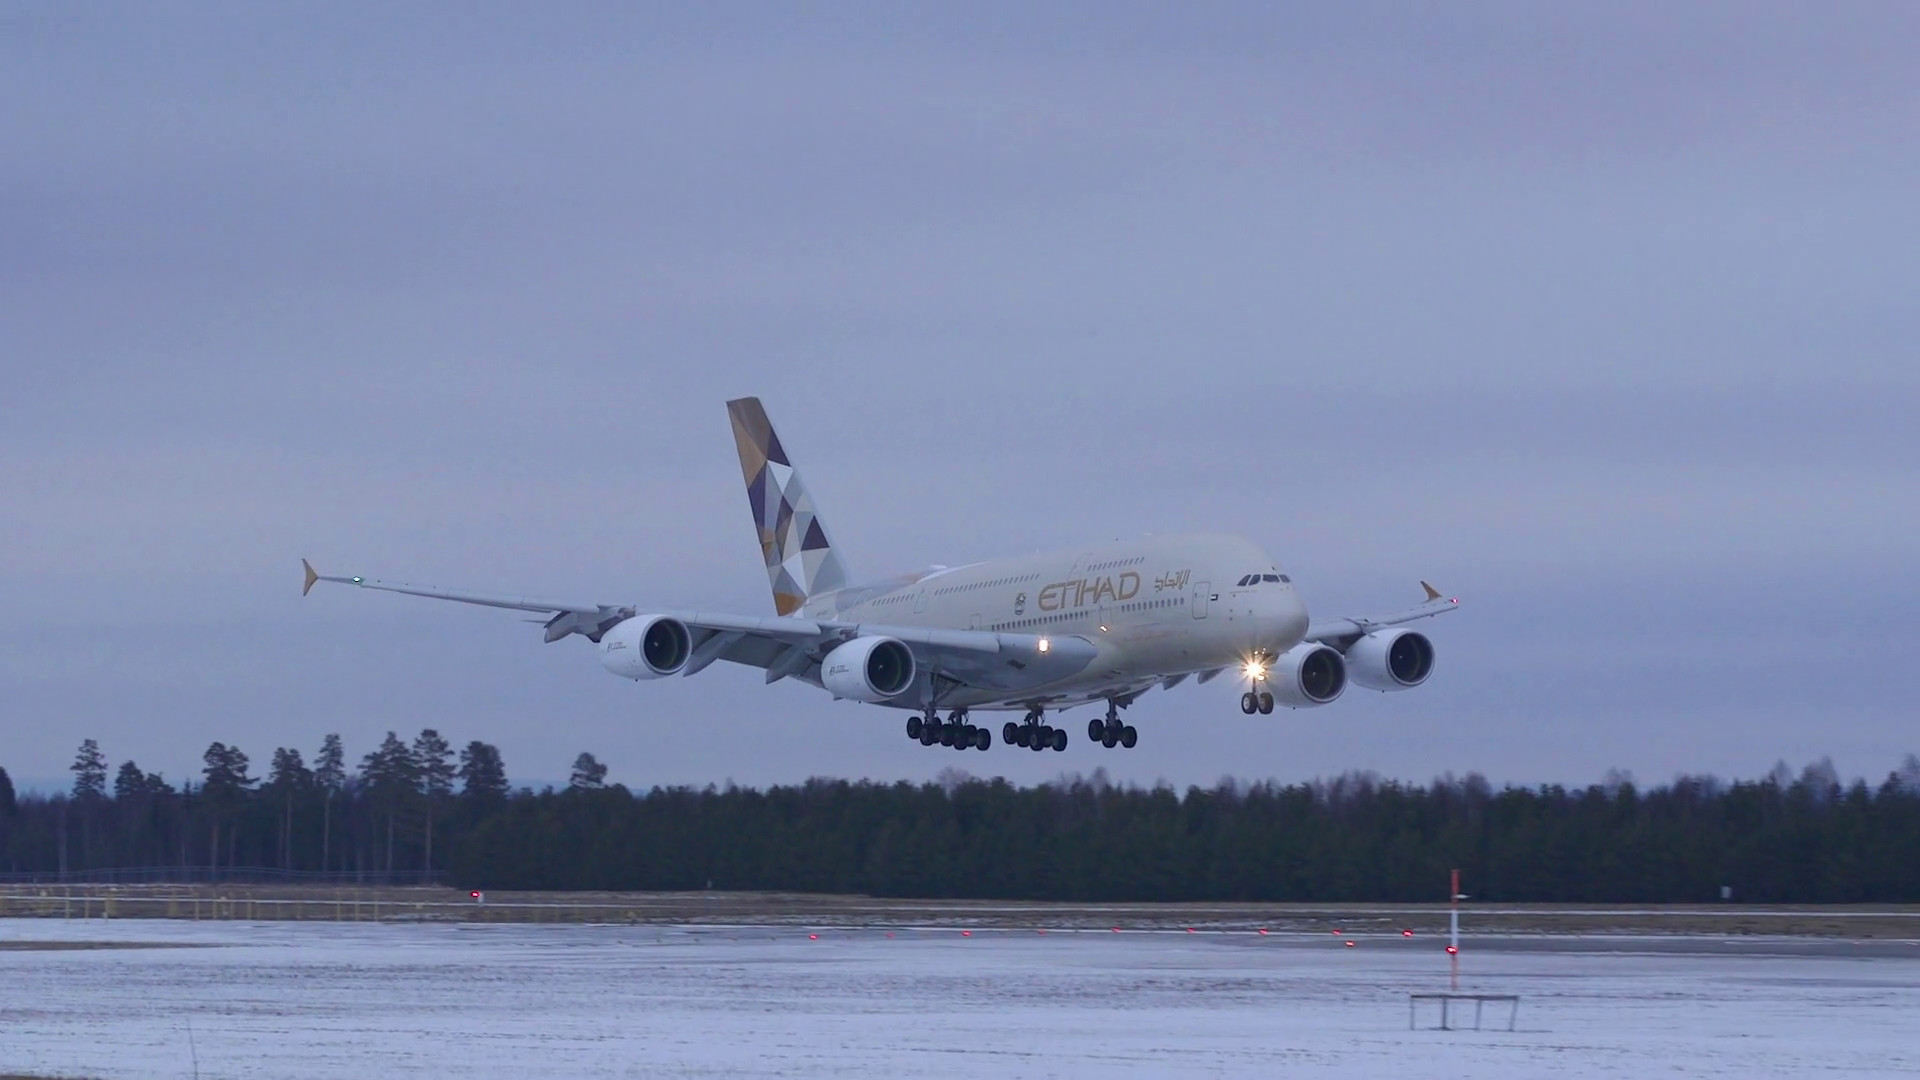 1920x1080 Background Image Of An Etihad Airbus A380 Landing On A Snowy Strip |  PaperPull